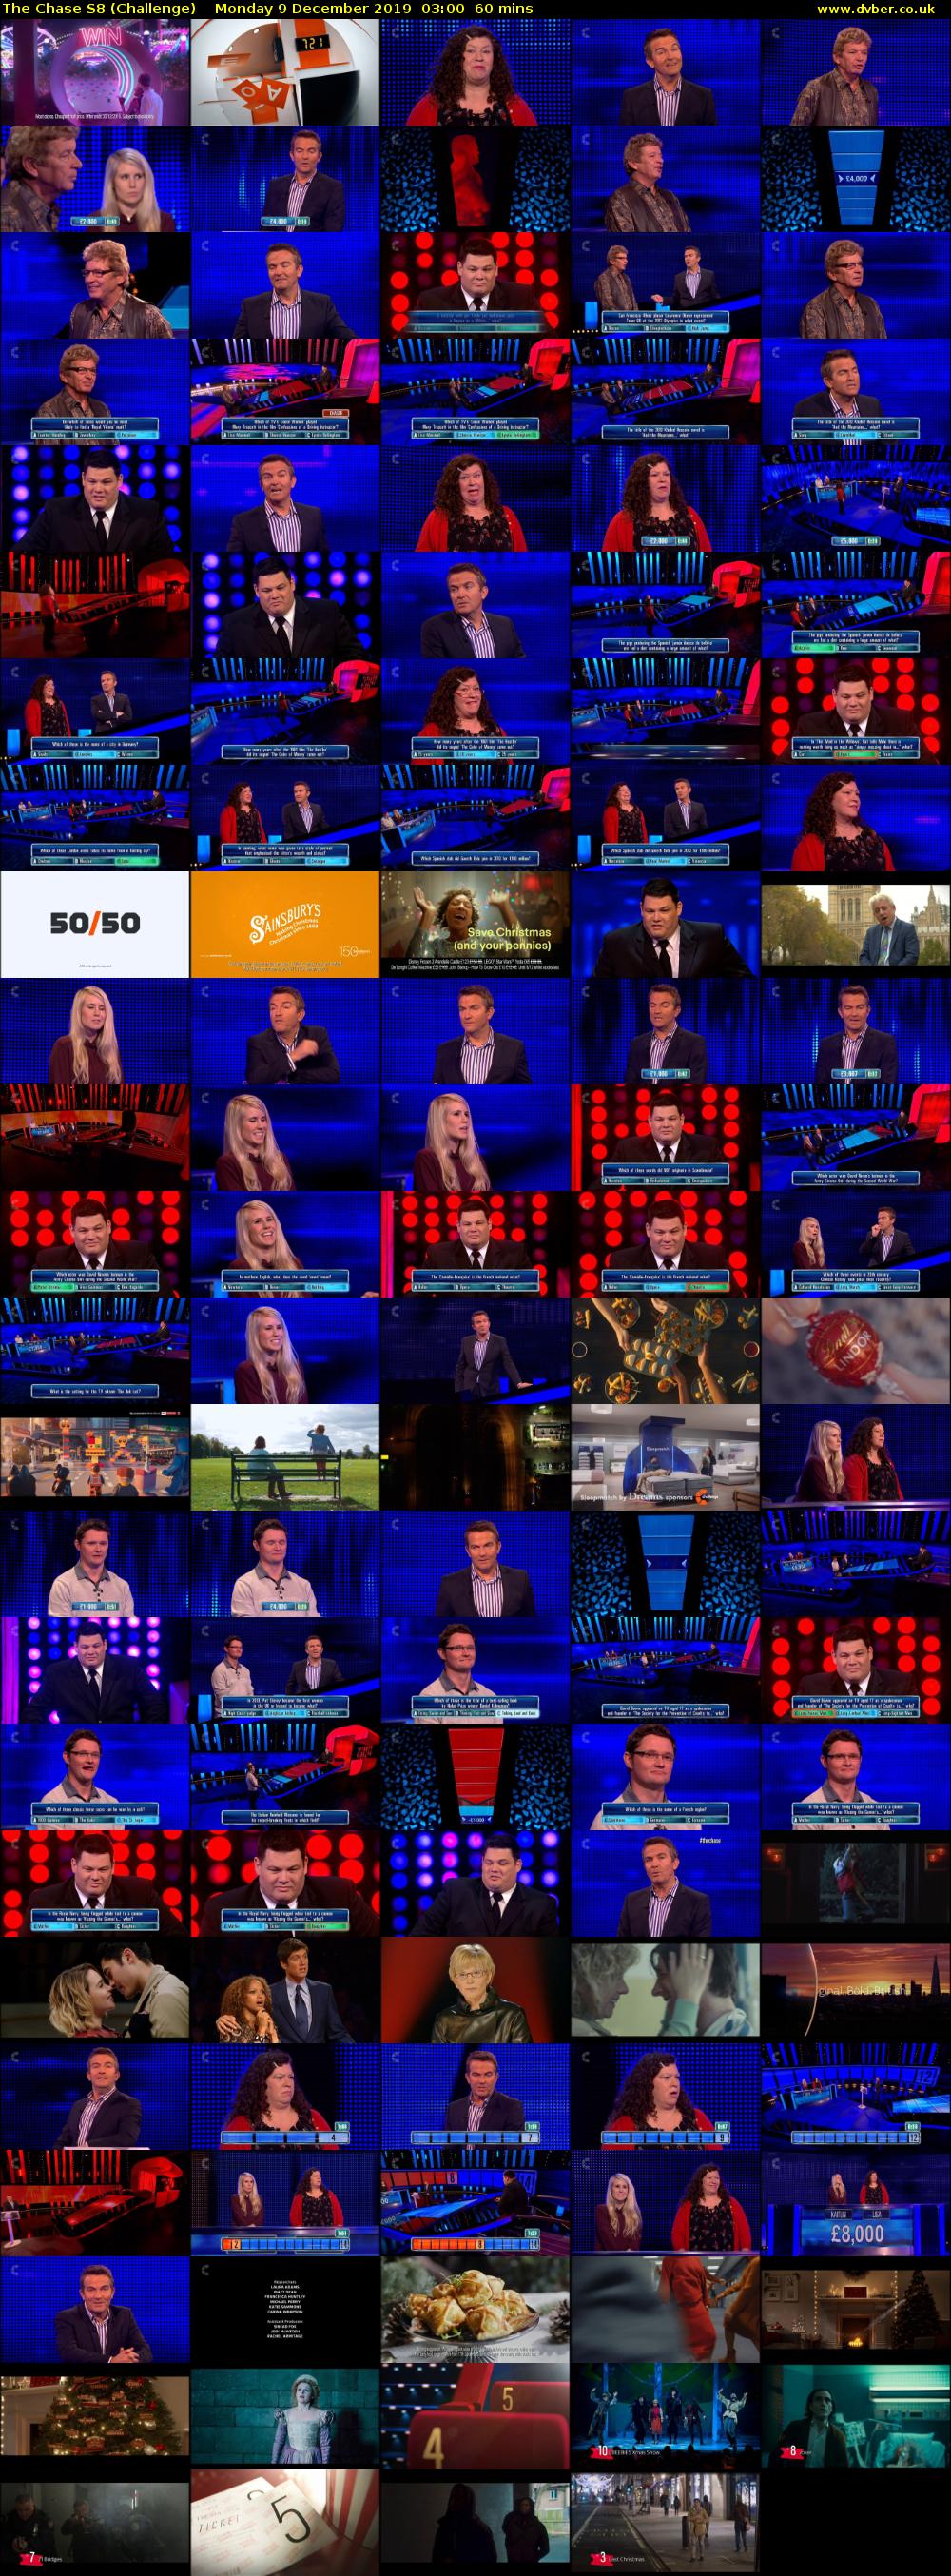 The Chase S8 (Challenge) Monday 9 December 2019 03:00 - 04:00